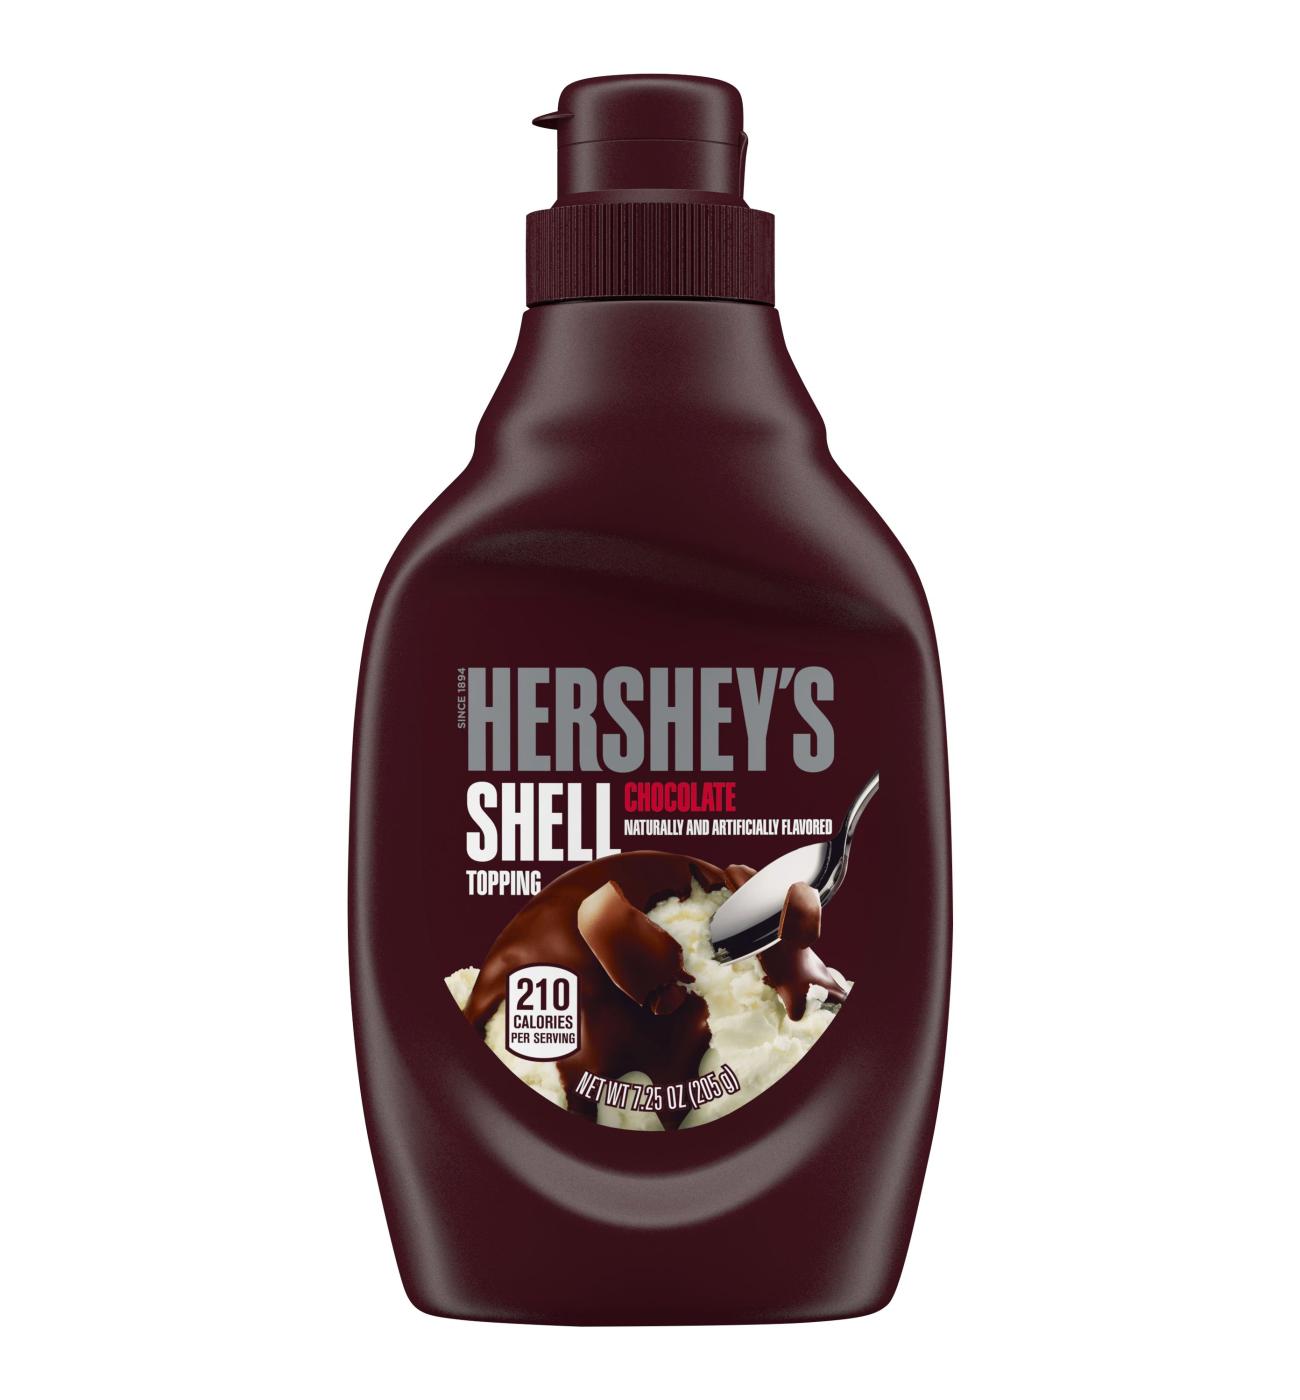 Hershey's Chocolate Flavored Shell Topping; image 1 of 5